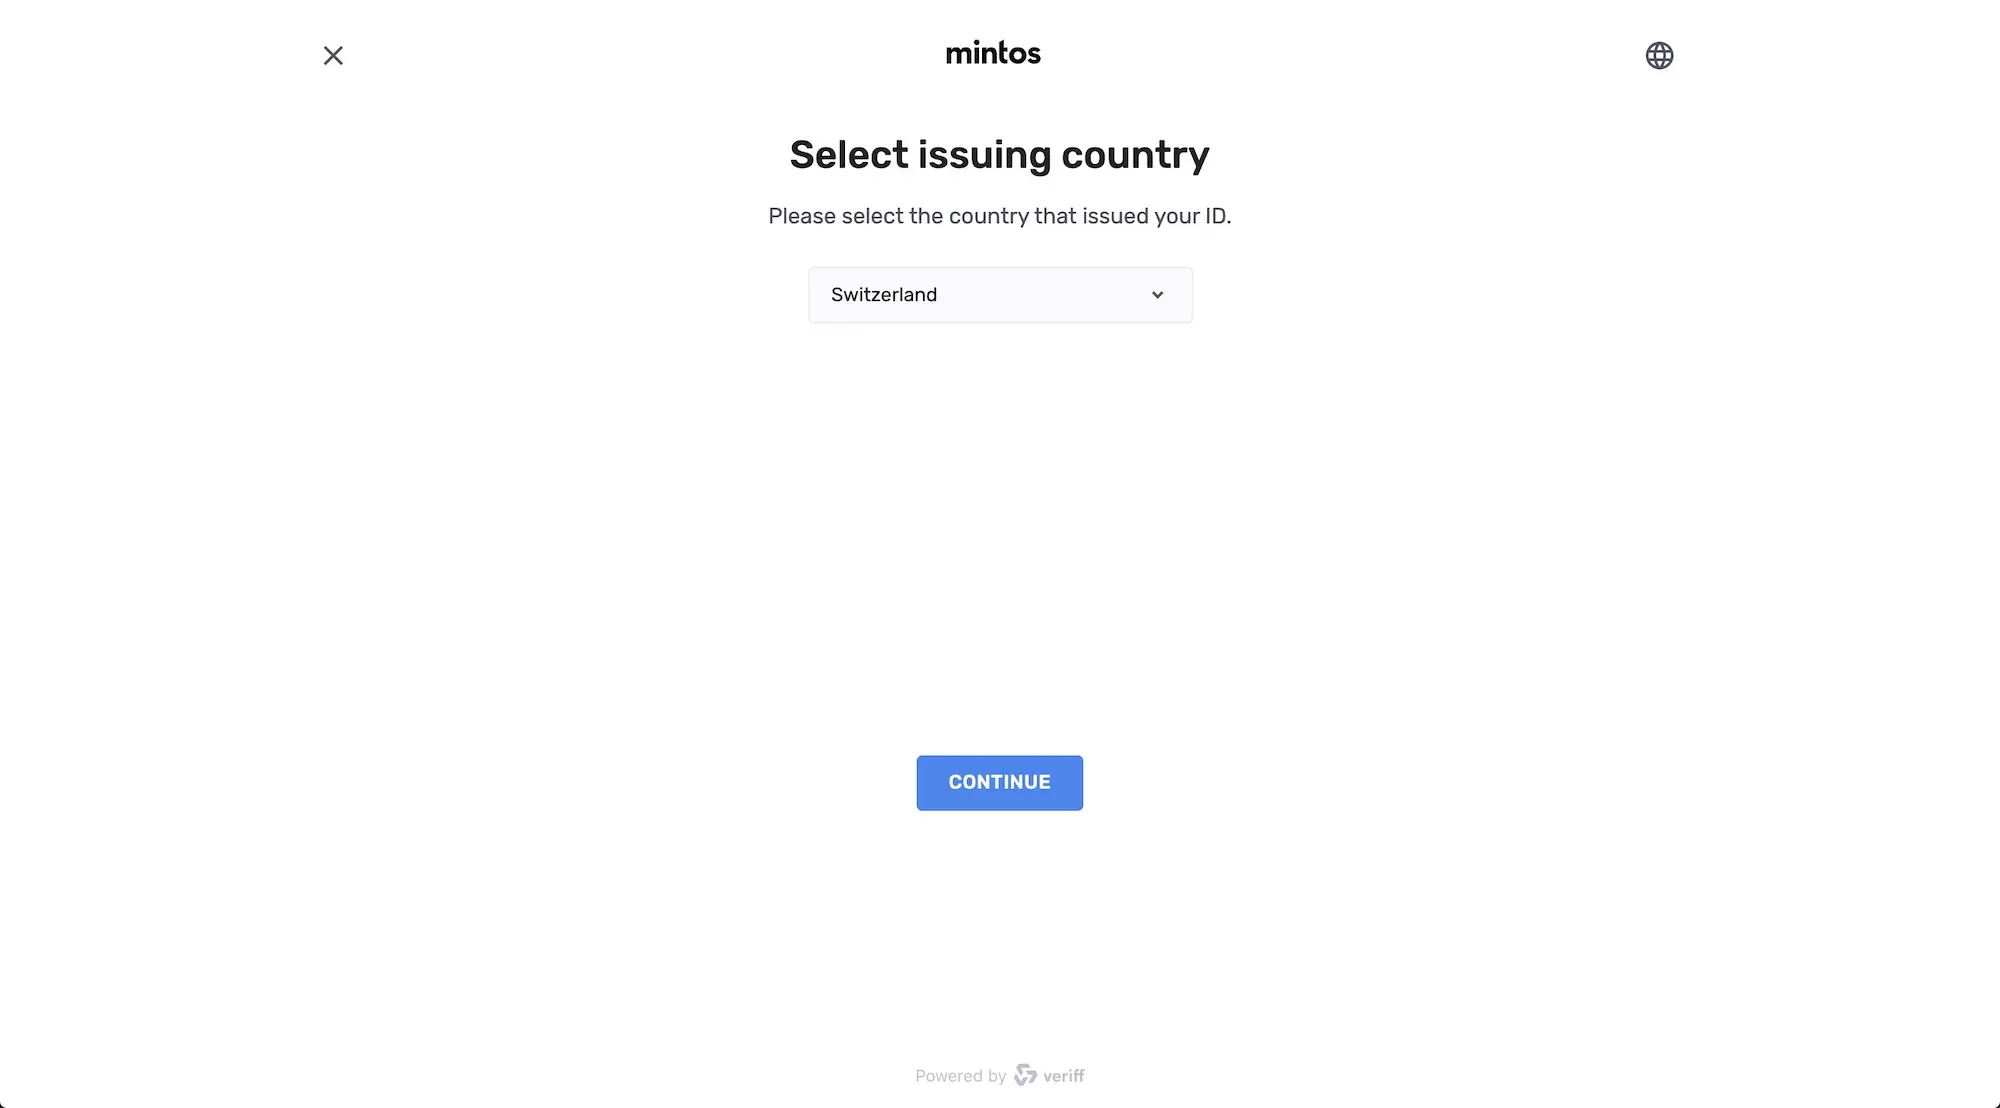 Select the country that issued you the ID that you will use to verify your identity with Mintos